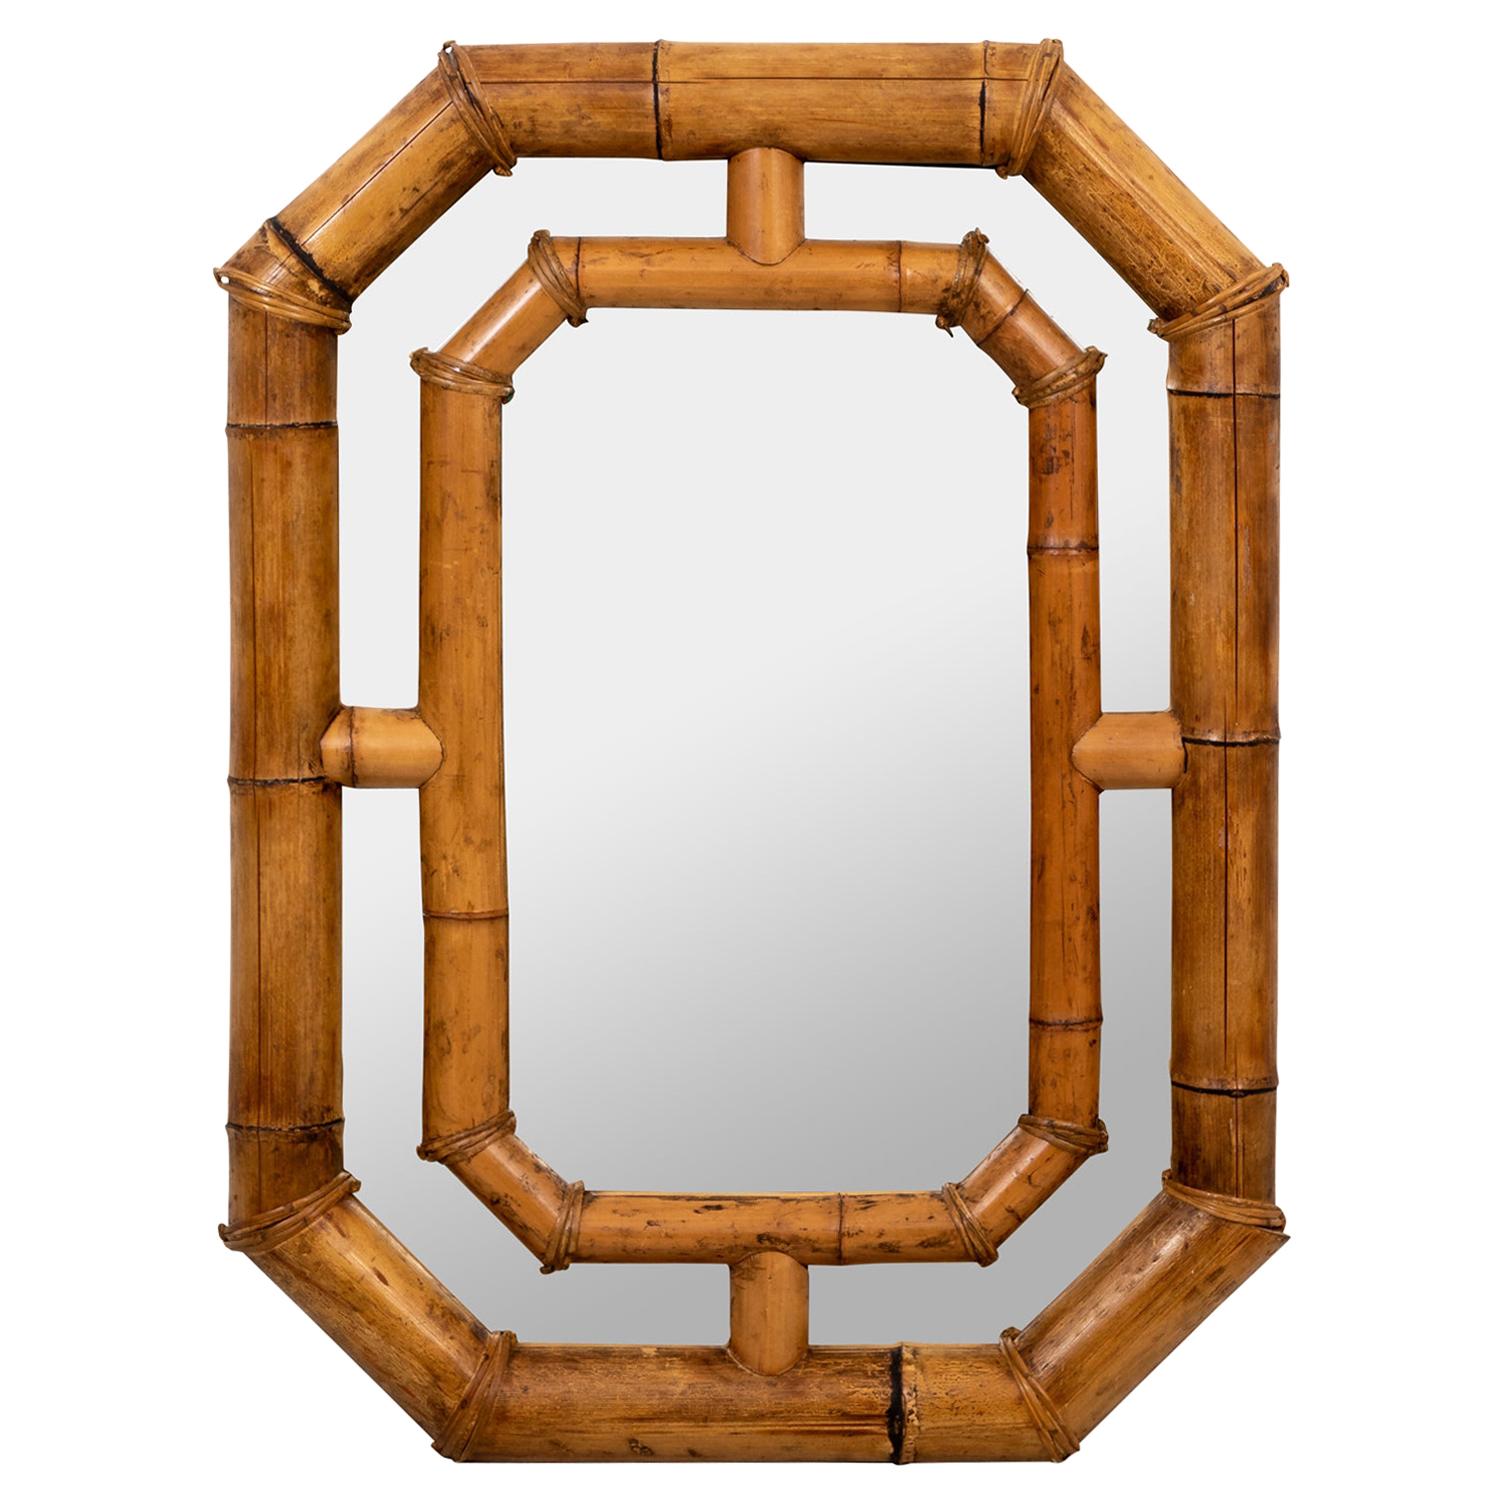 Extra Large Octagon Shaped Bamboo Mirror Palm Beach Regency Style